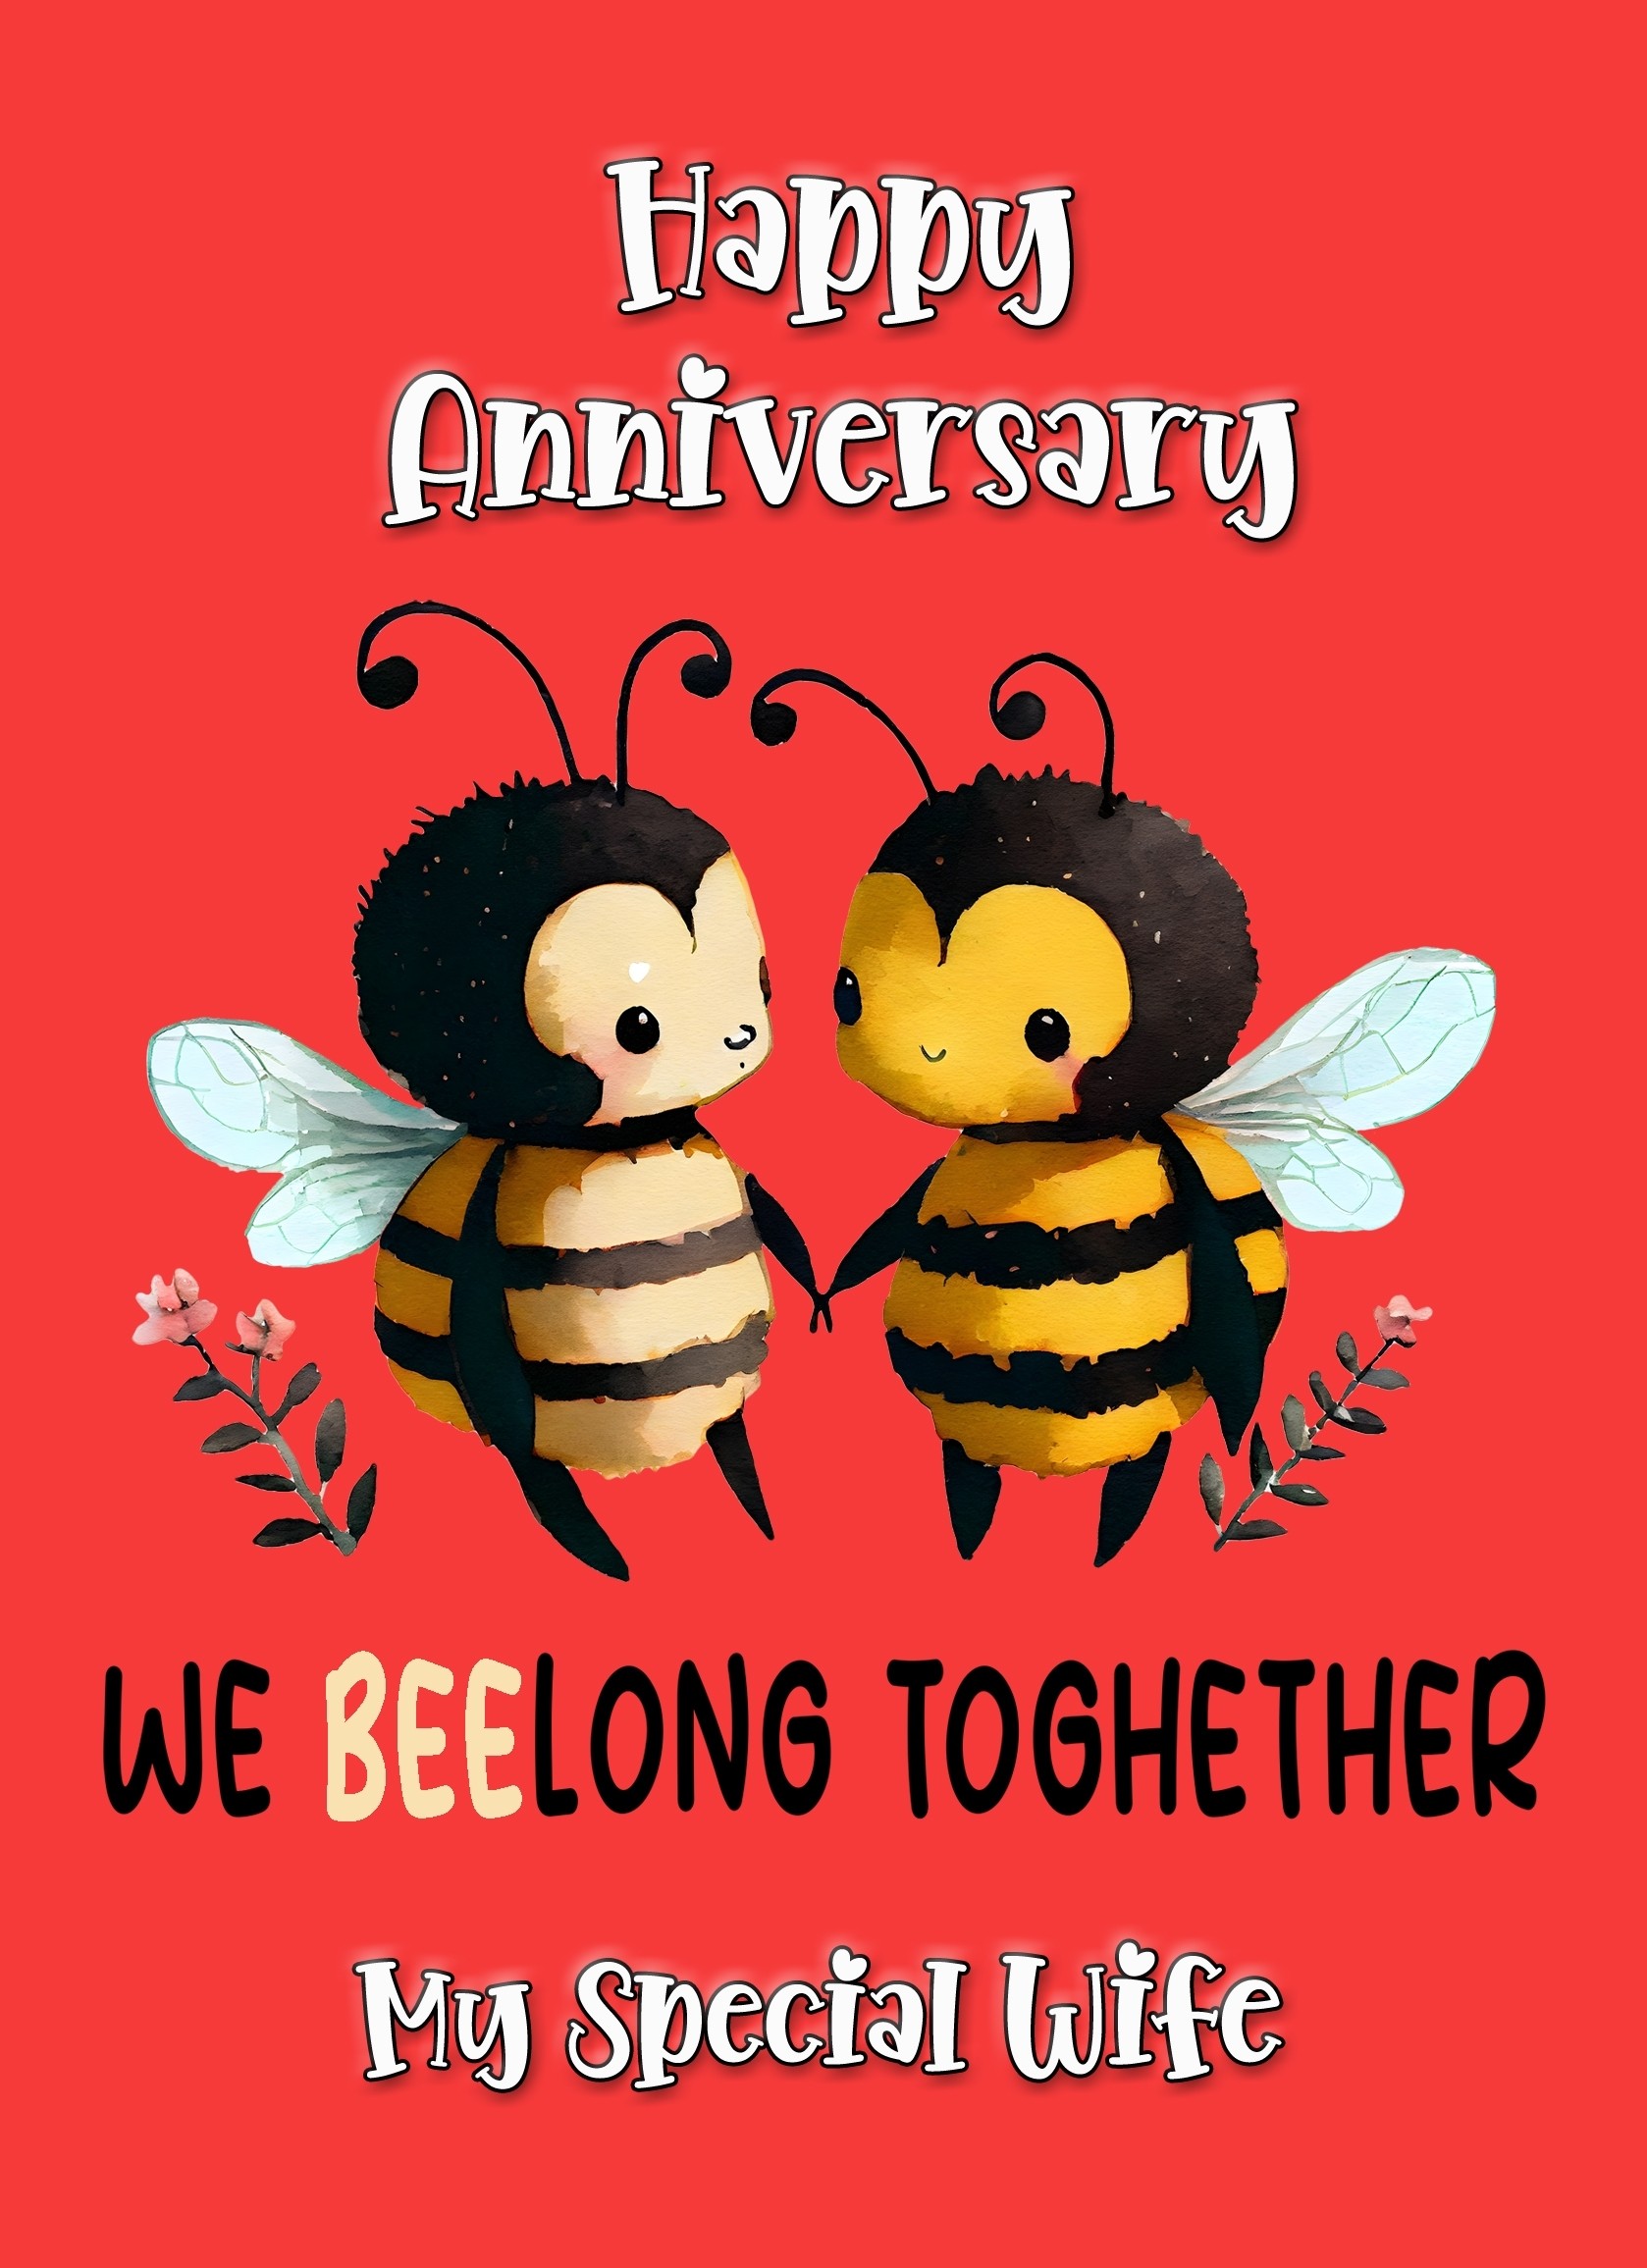 Funny Pun Romantic Anniversary Card for Wife (Beelong Together)